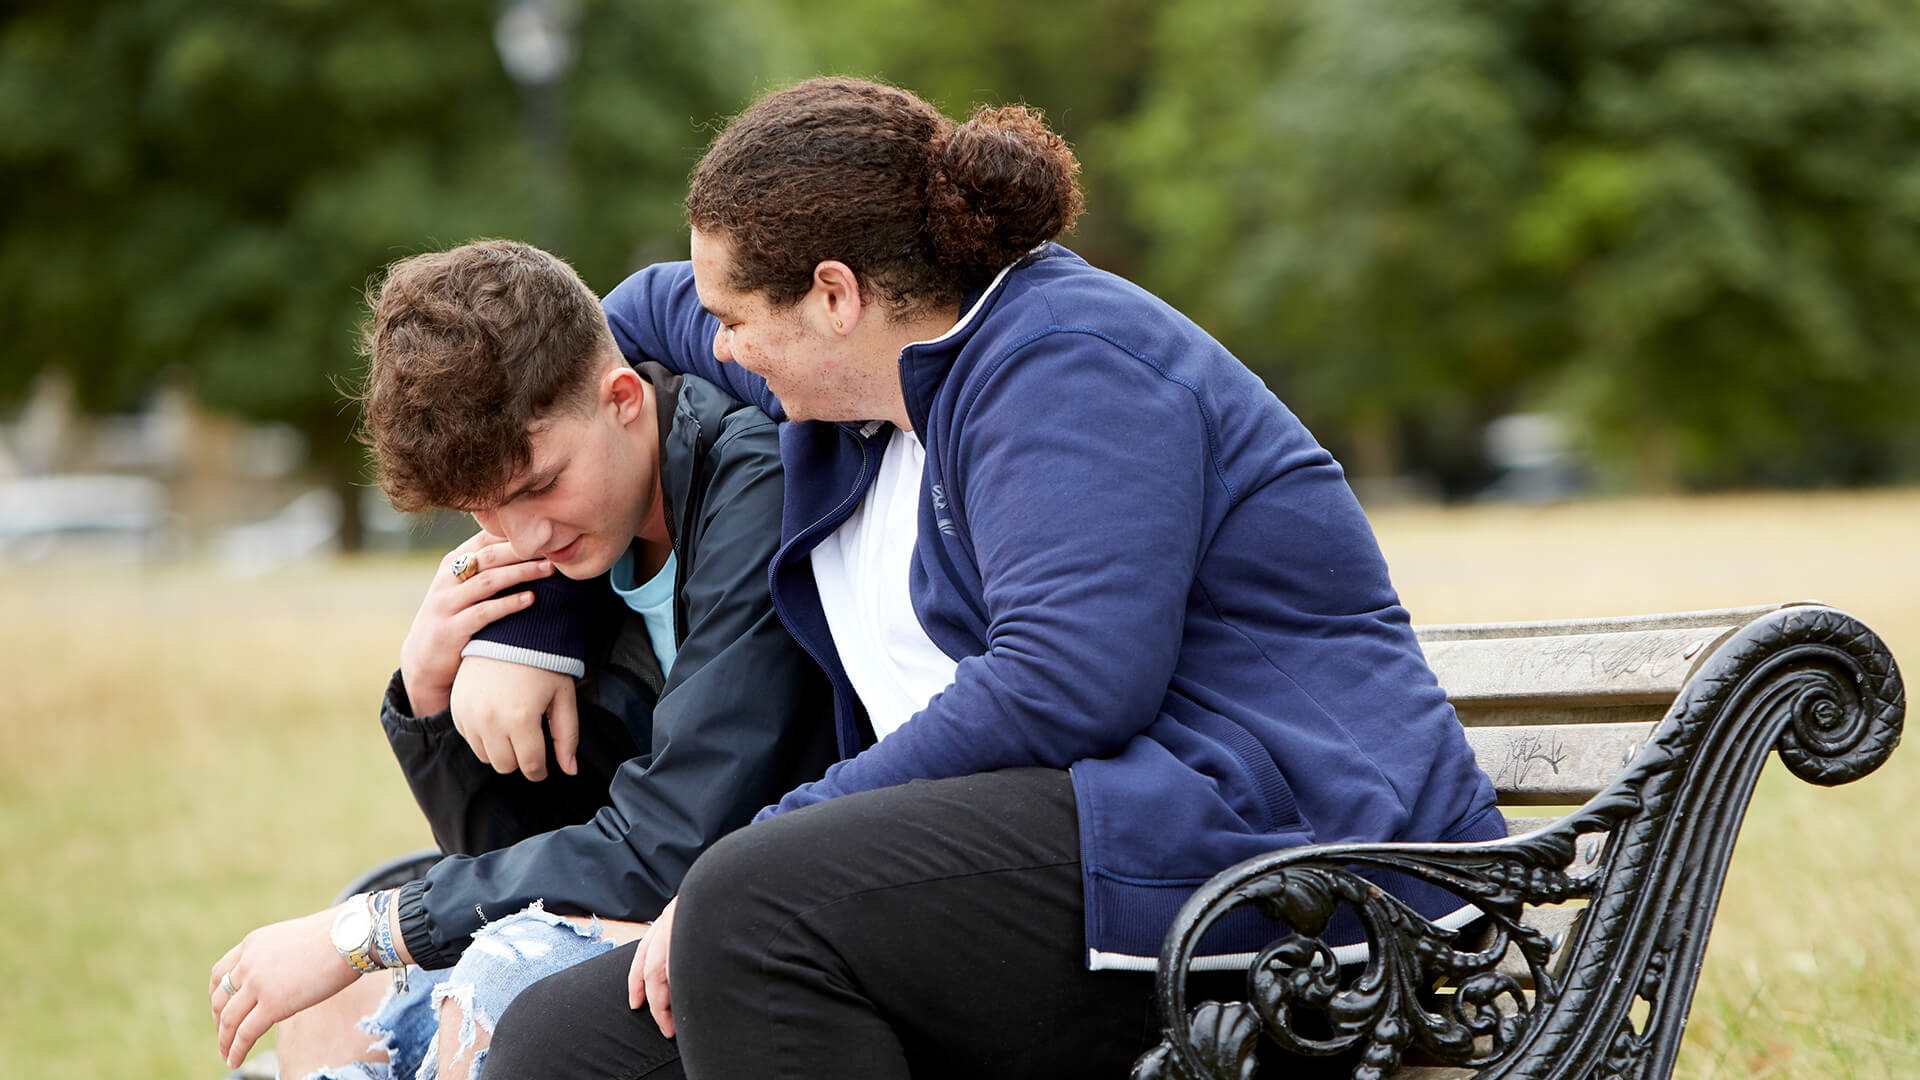 Two young people sit on a bench in a park. The person on the right has his arm around the other young person. The young person on the left is holding the other persons arm while looking down at the floor.